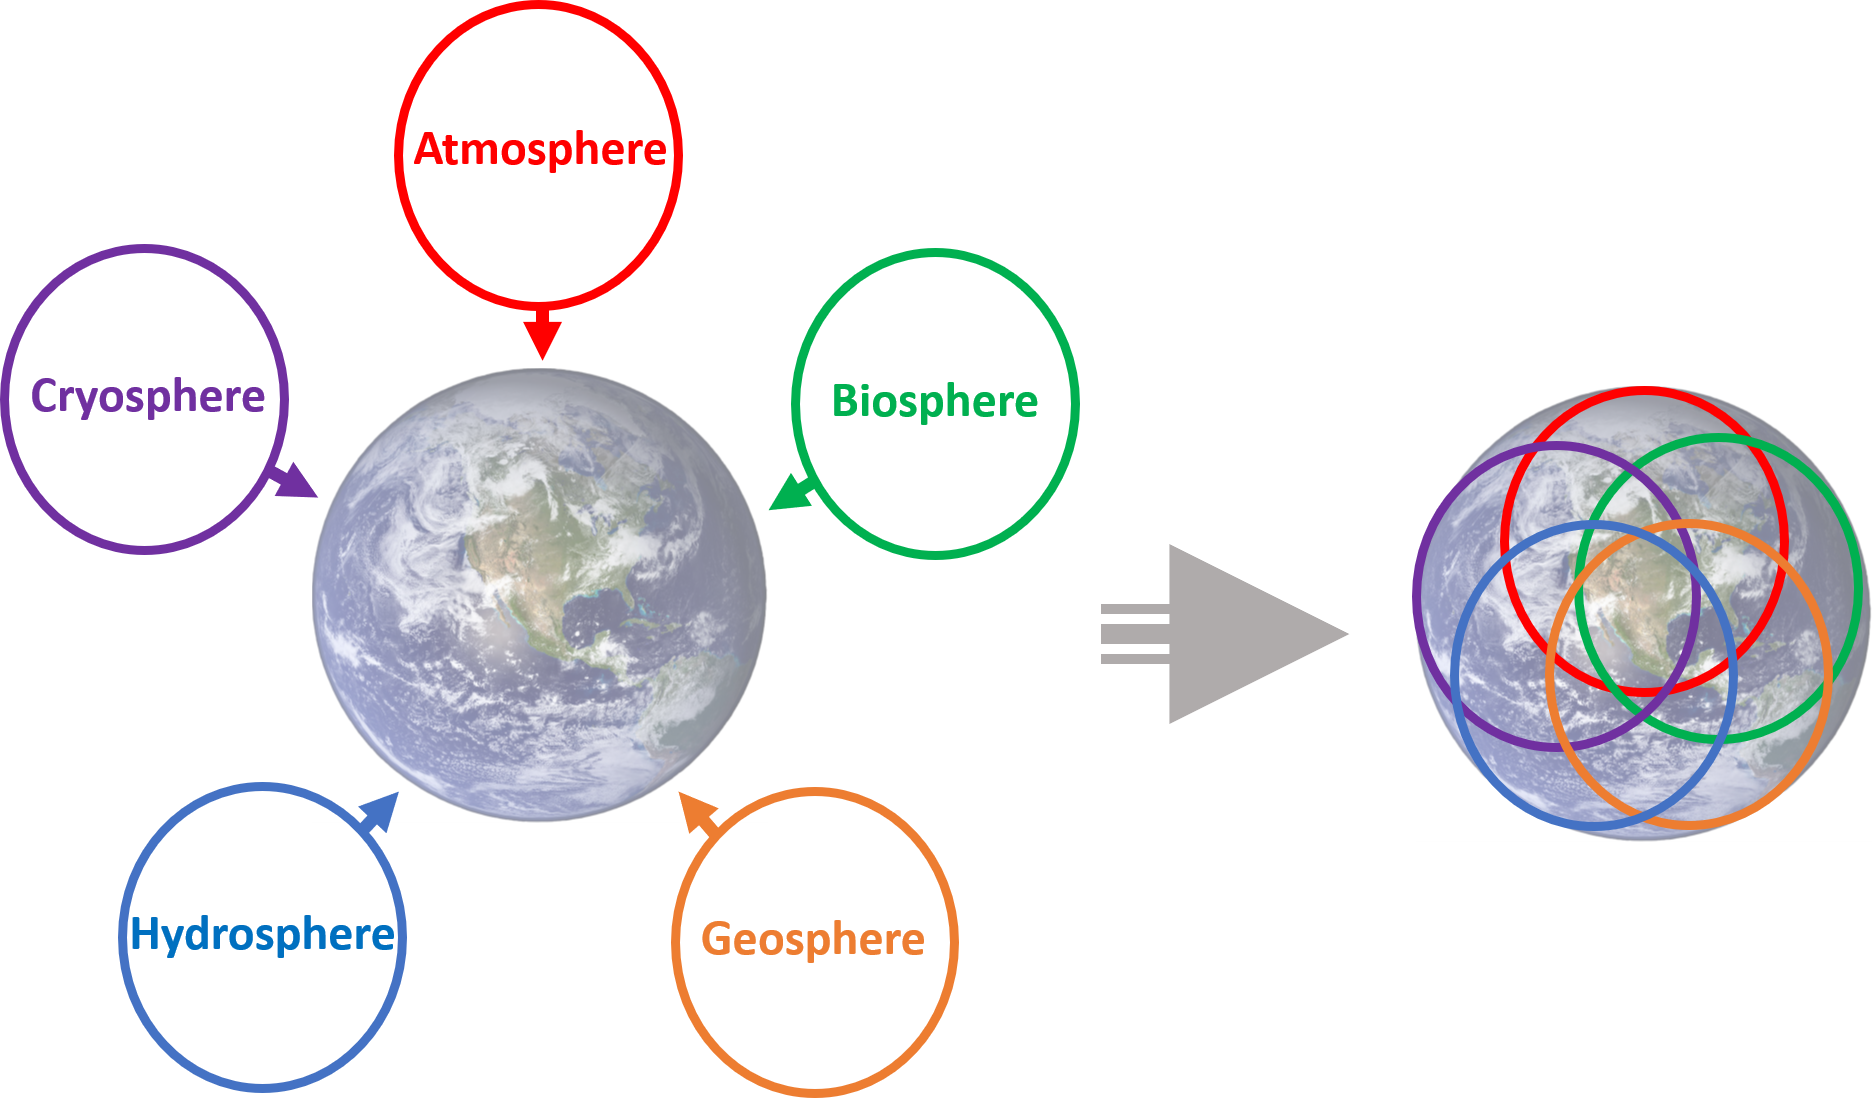 Graphic showing the integration of Earth's Systems